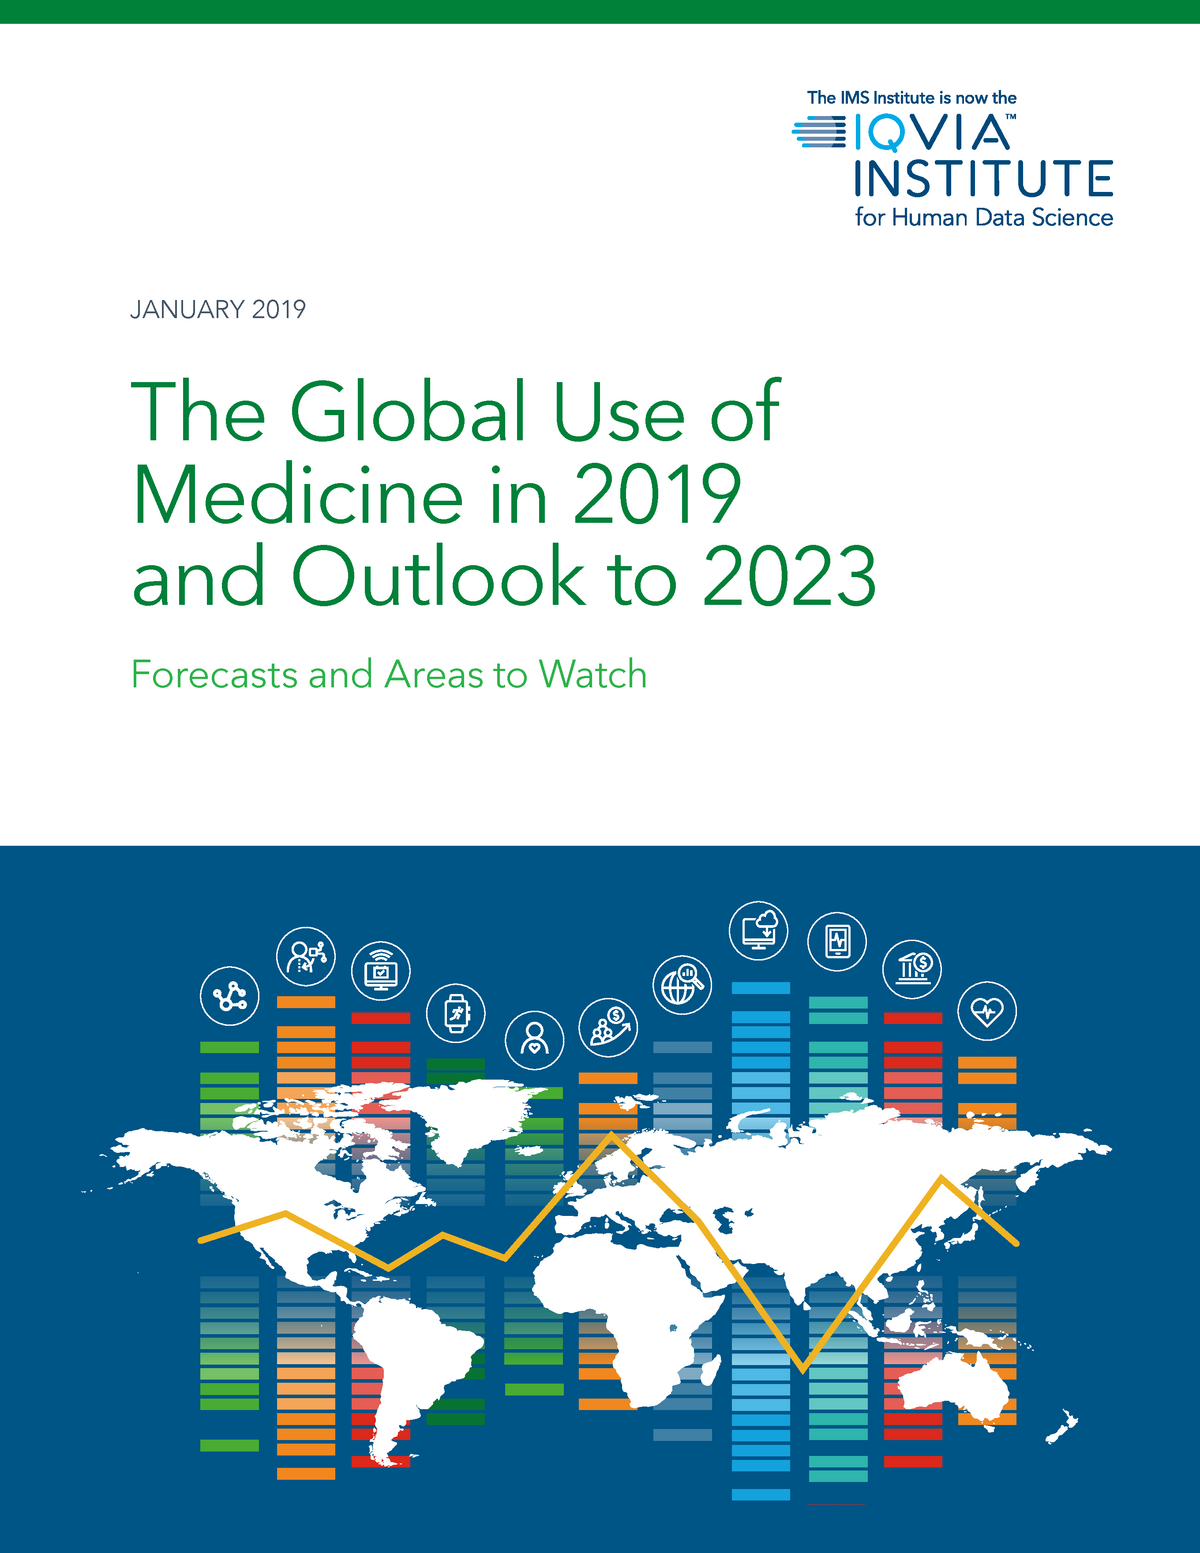 The global use of medicine in 2019 and outlook to 2023 JANUARY 2019